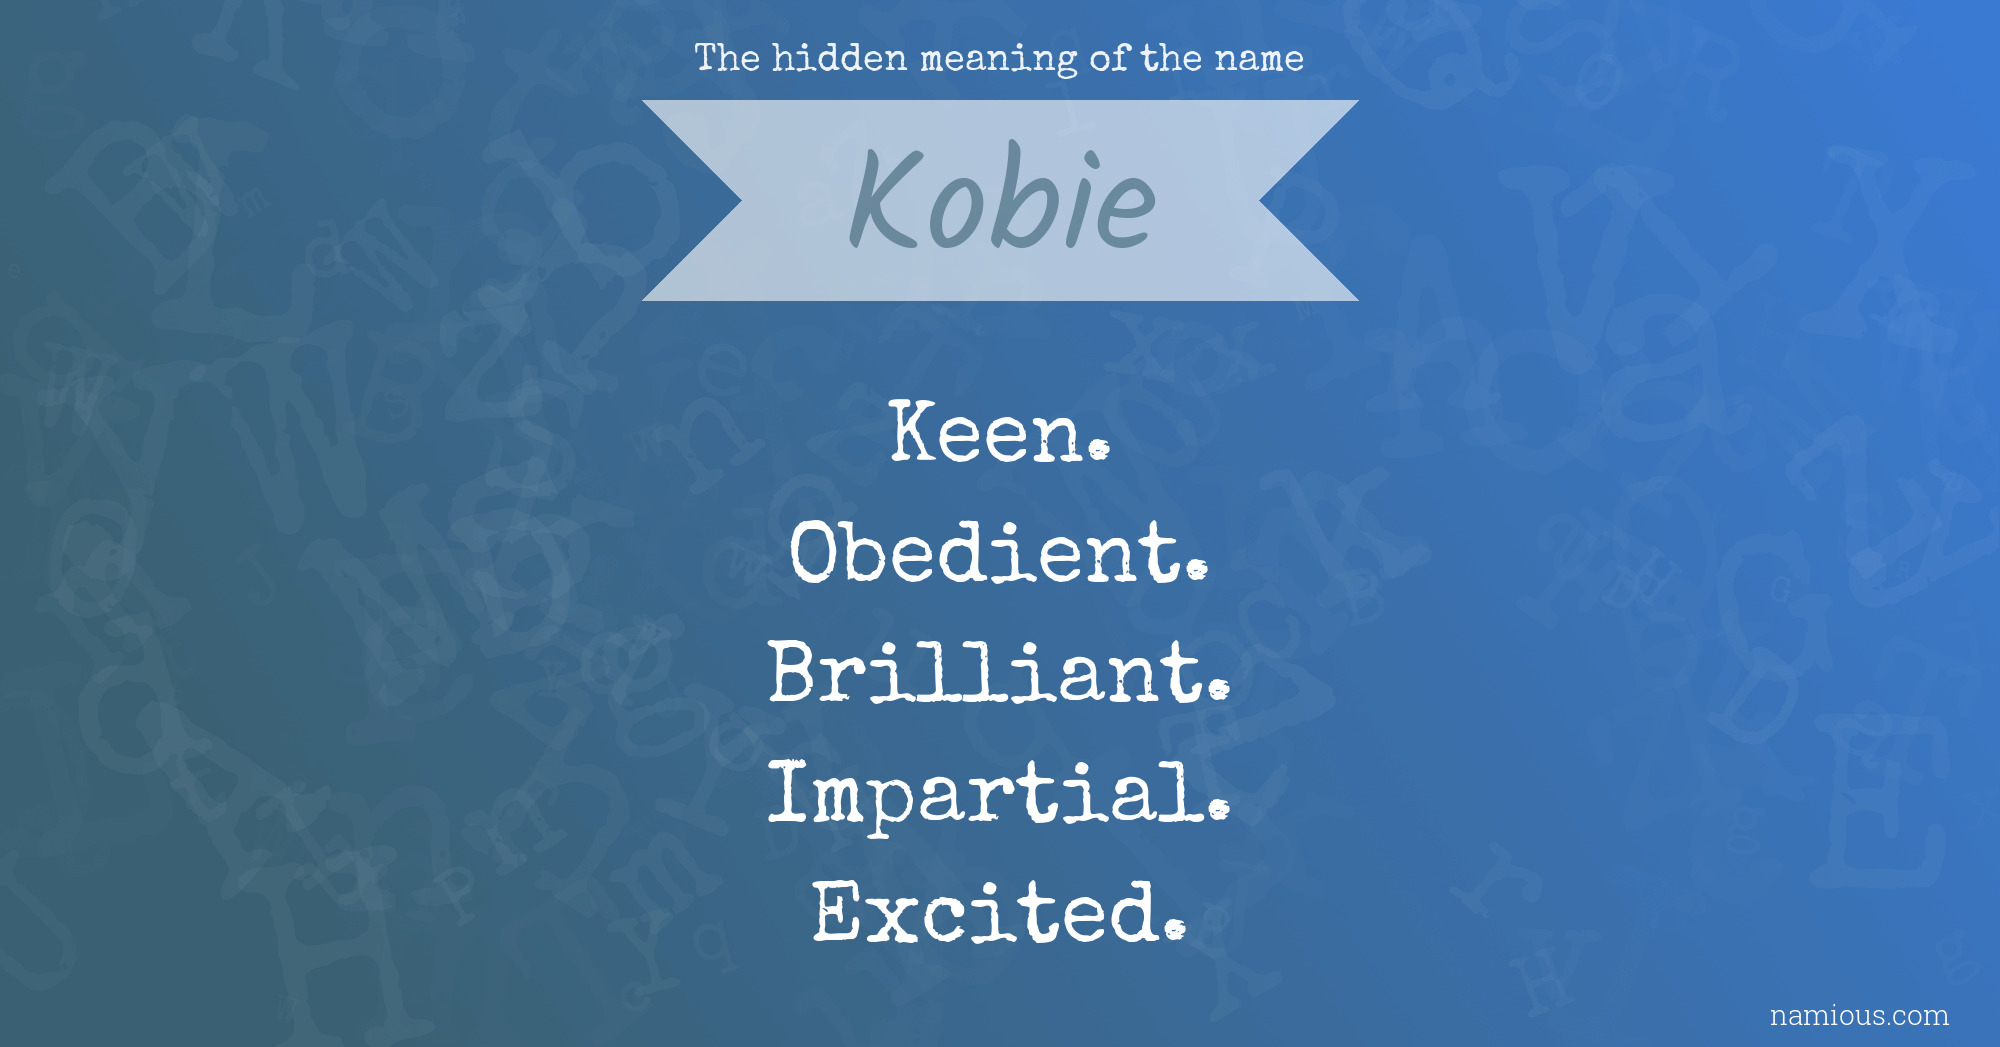 The hidden meaning of the name Kobie